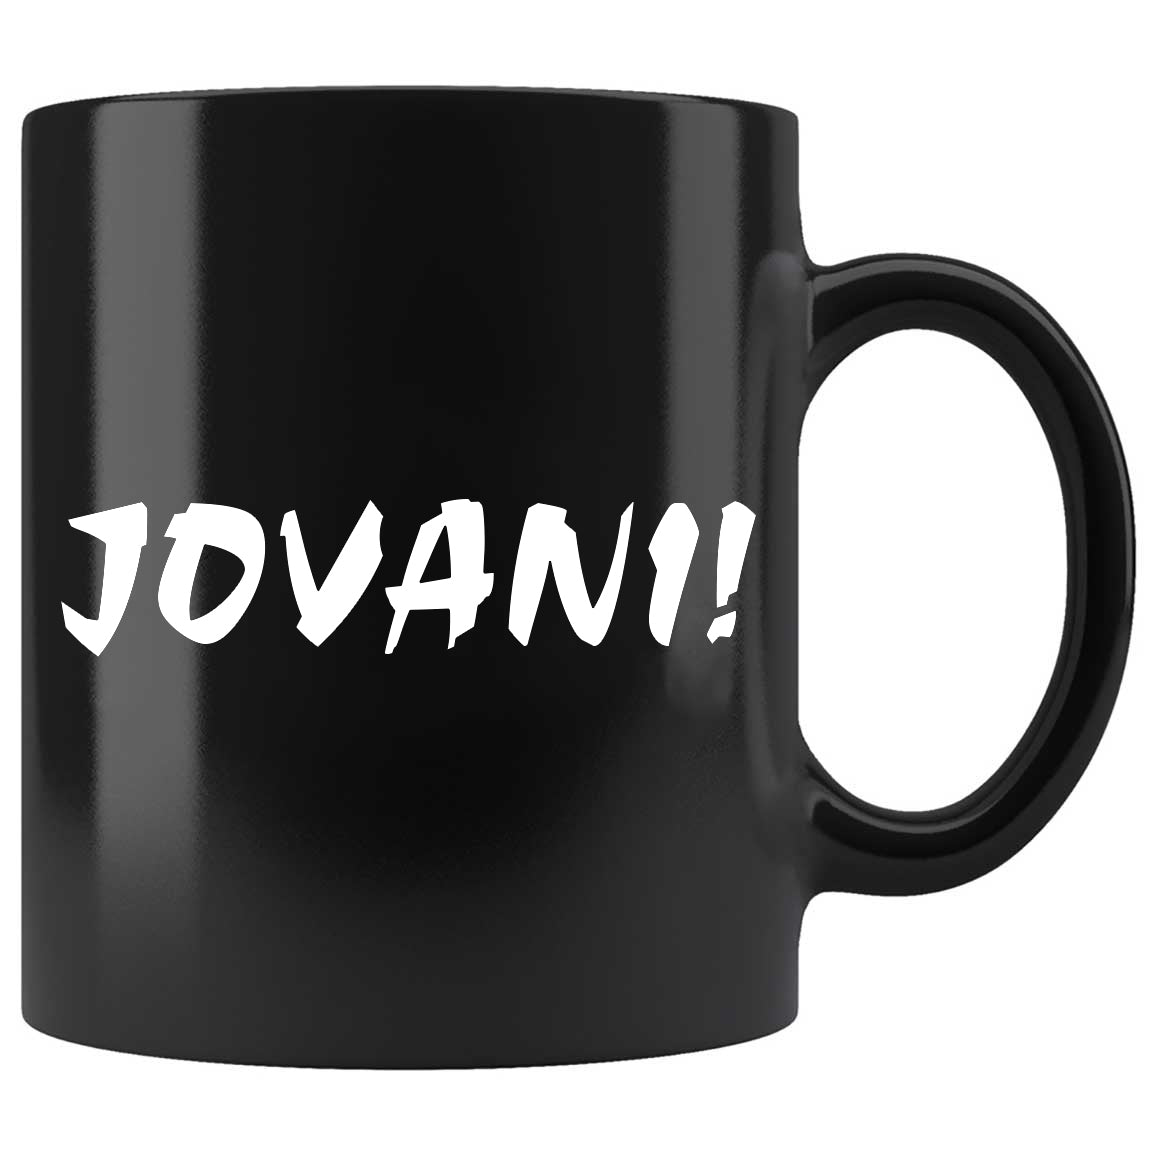 Skitongifts Funny Ceramic Coffee Mug For Birthday, Mother's Day, Father's Day, Christmas PN101221-JOVANI